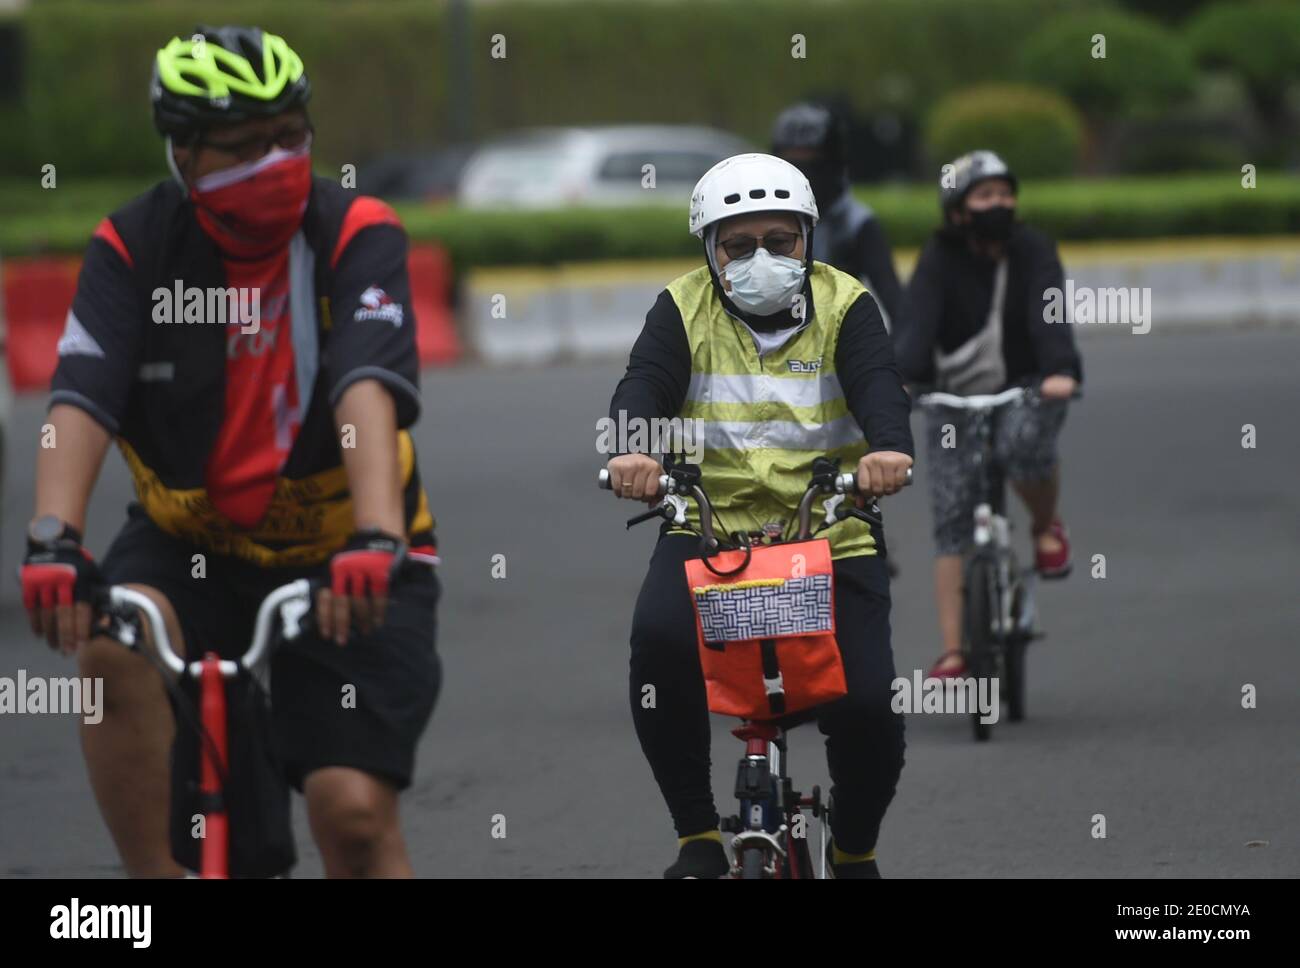 Jakarta, Indonesia. 31st Dec, 2020. People wearing face masks ride bicycles in Jakarta, Indonesia, Dec. 31, 2020. The COVID-19 cases in Indonesia rose by 8,074 within one day to 743,198, with the death toll adding by 194 to 22,138, the Health Ministry said on Thursday. Credit: Zulkarnain/Xinhua/Alamy Live News Stock Photo